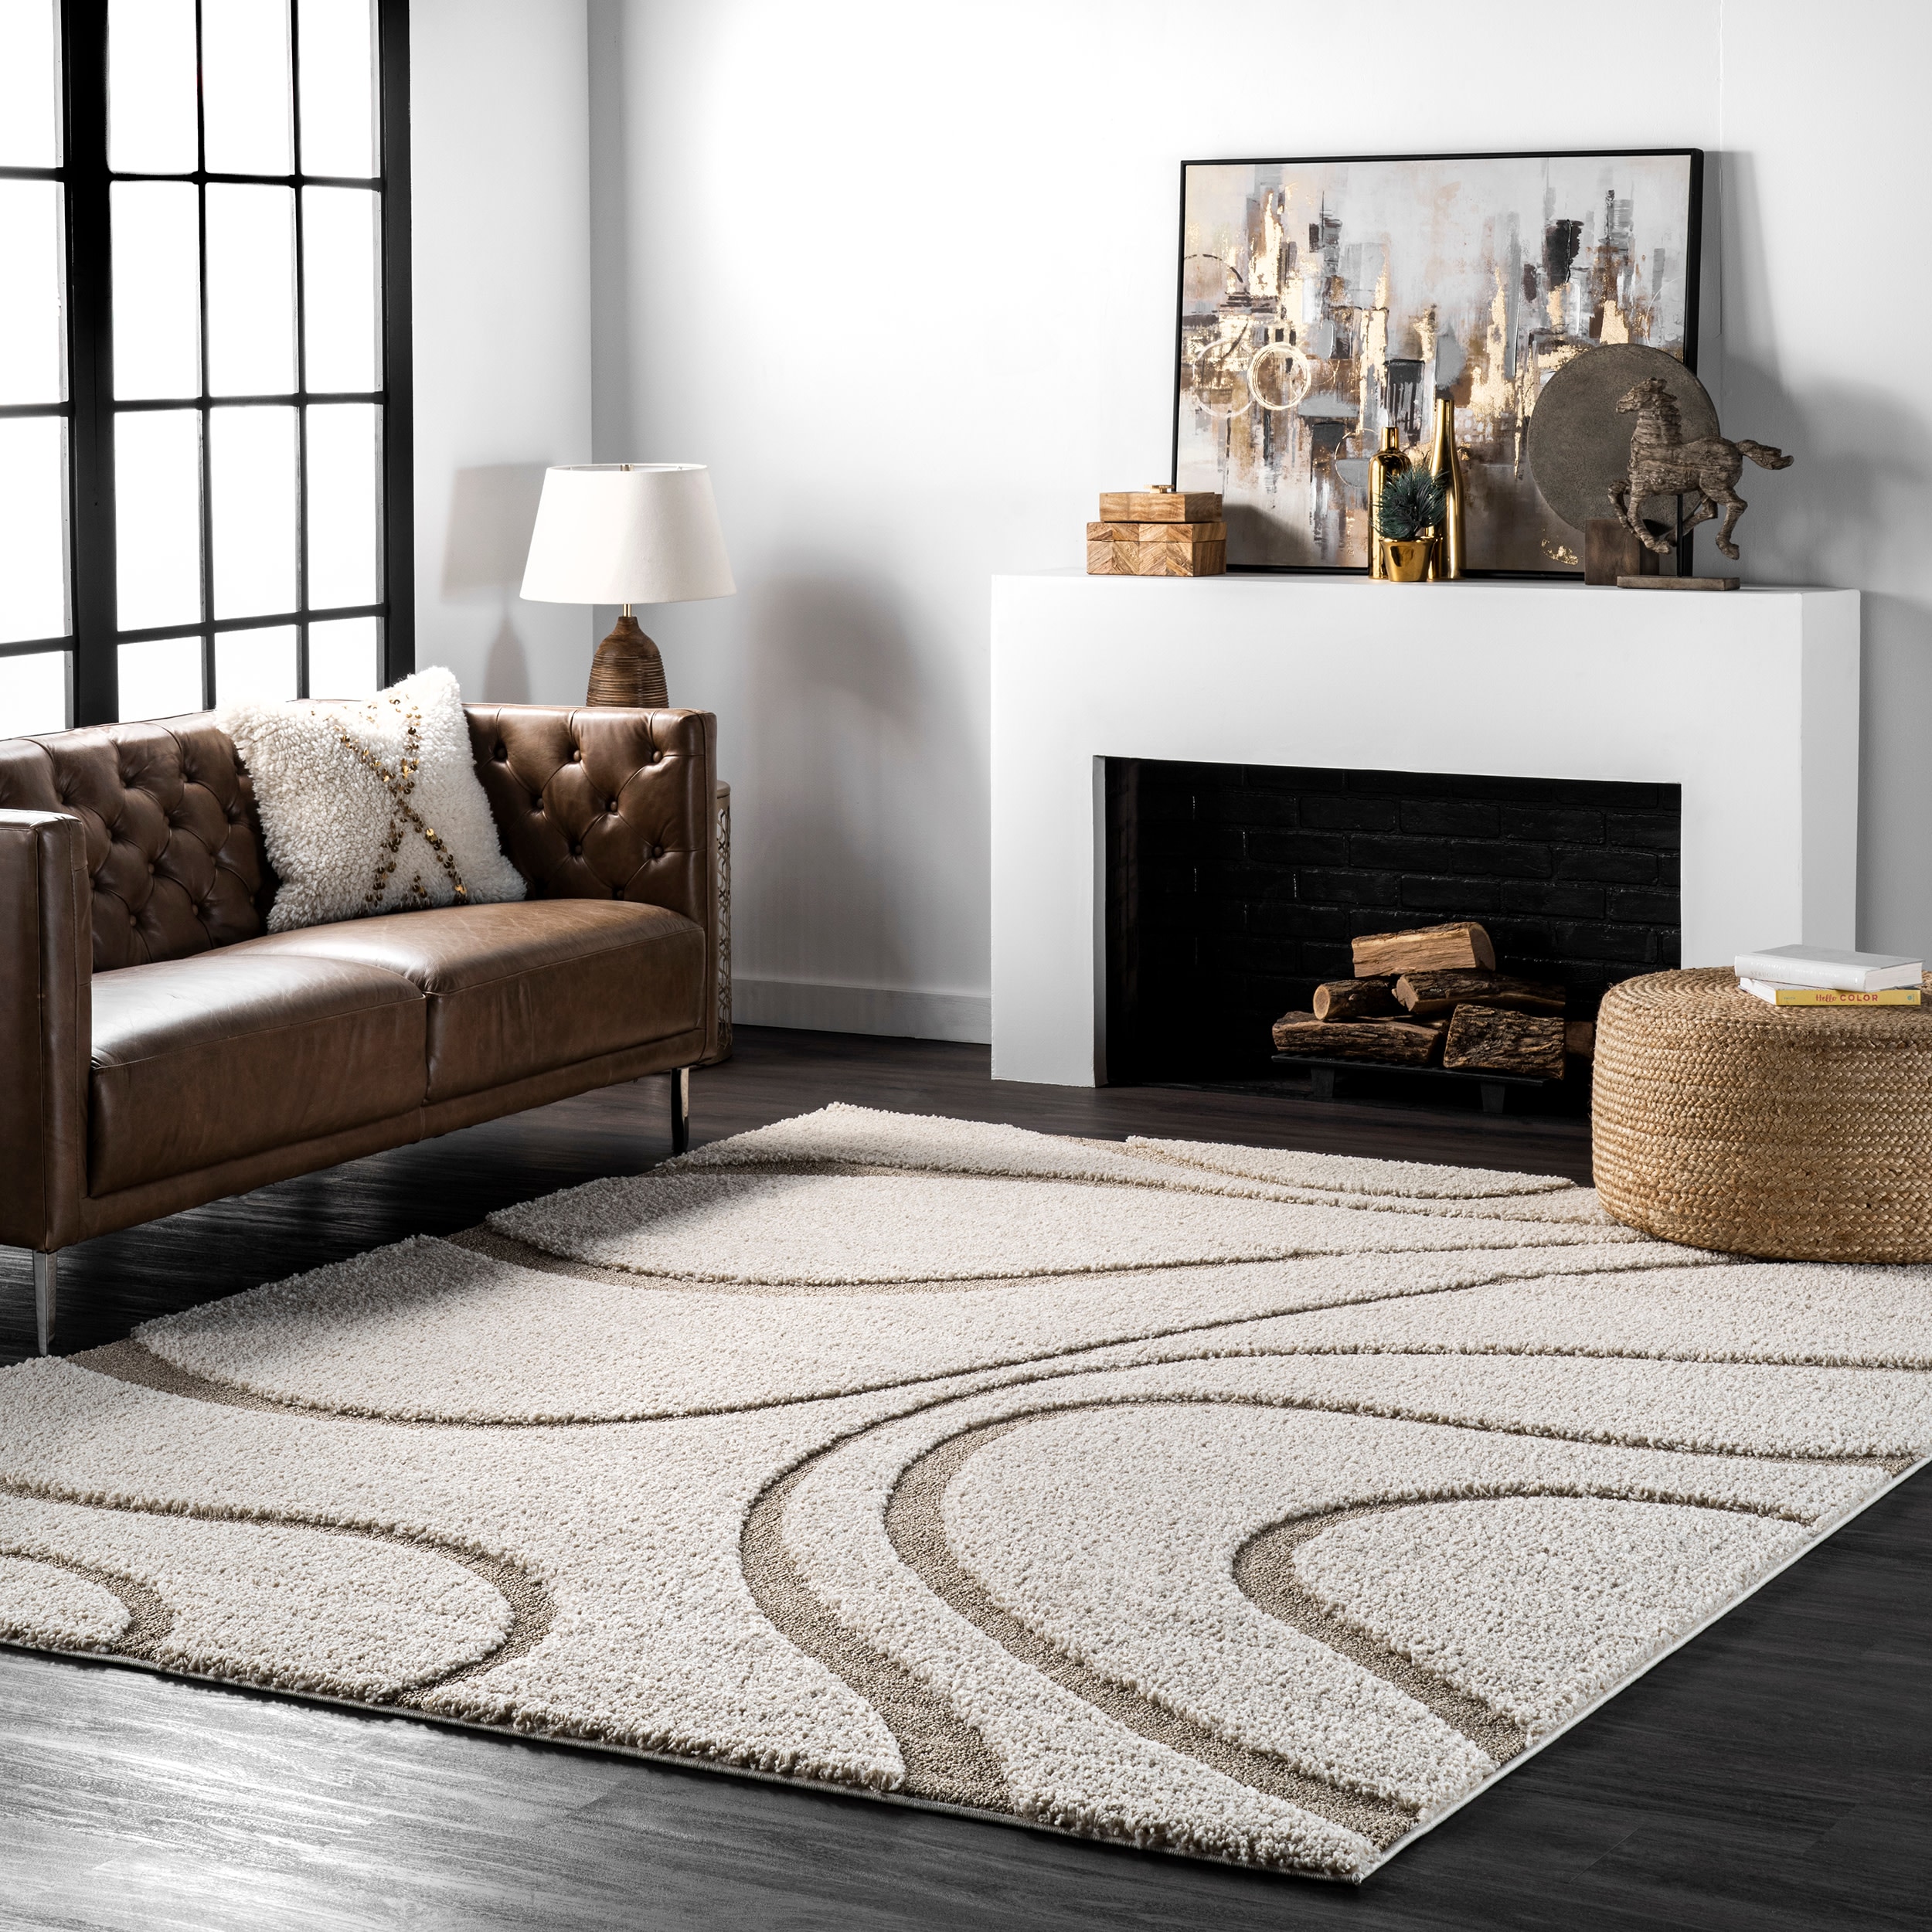 18 Living Room Rug Ideas That Will Floor You